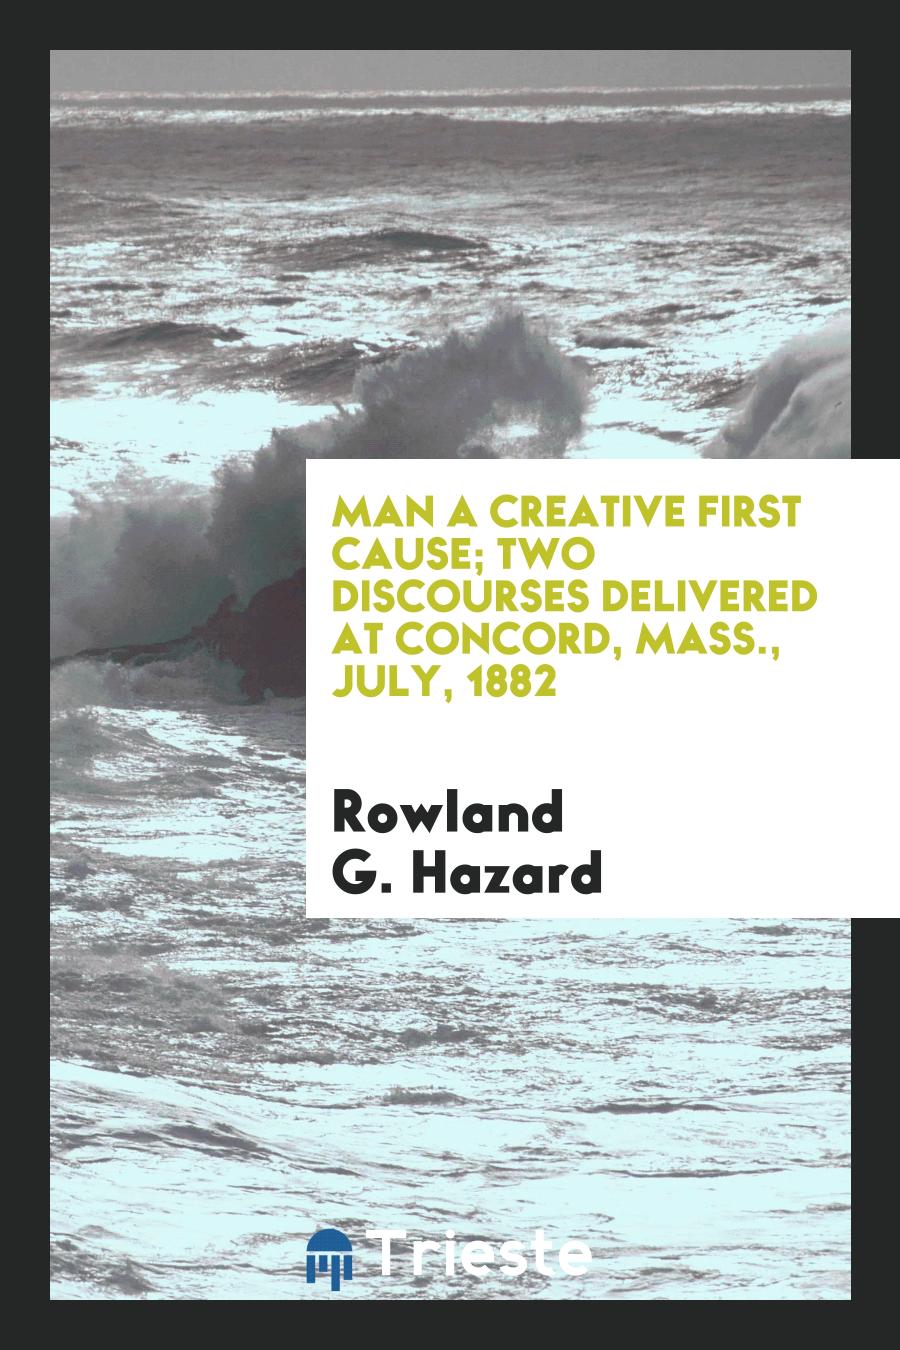 Man a Creative First Cause; Two Discourses Delivered at Concord, Mass., July, 1882